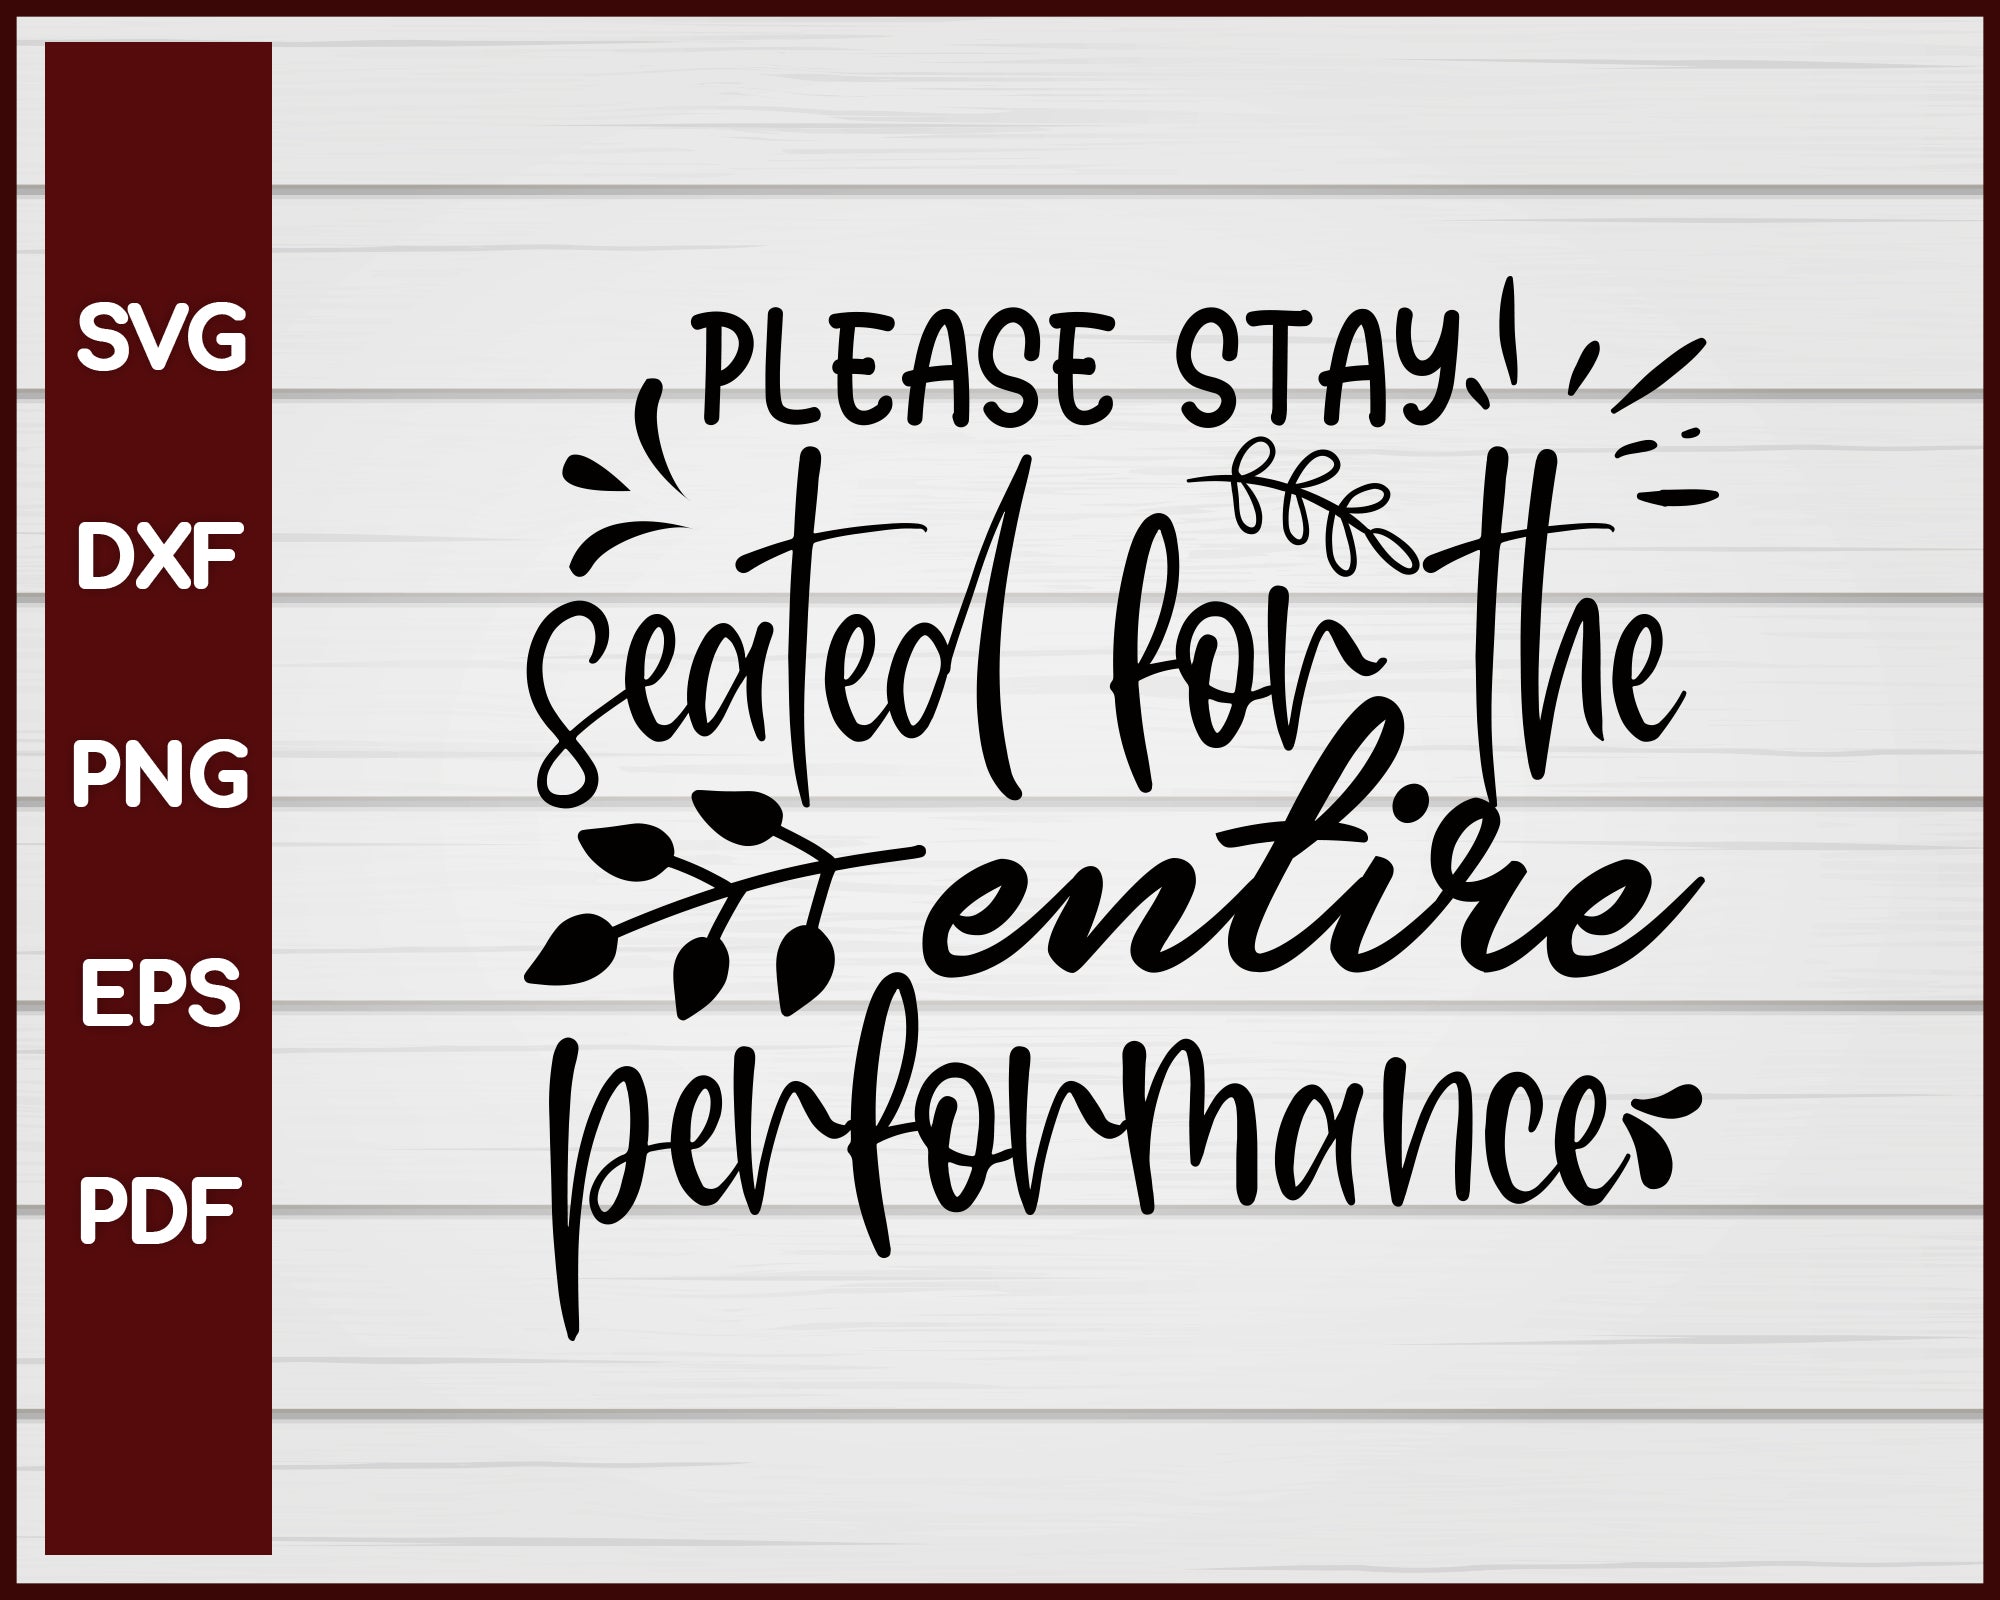 Please Stay Seated For The Entire Performance svg Cut File For Cricut Silhouette eps png dxf Printable Files